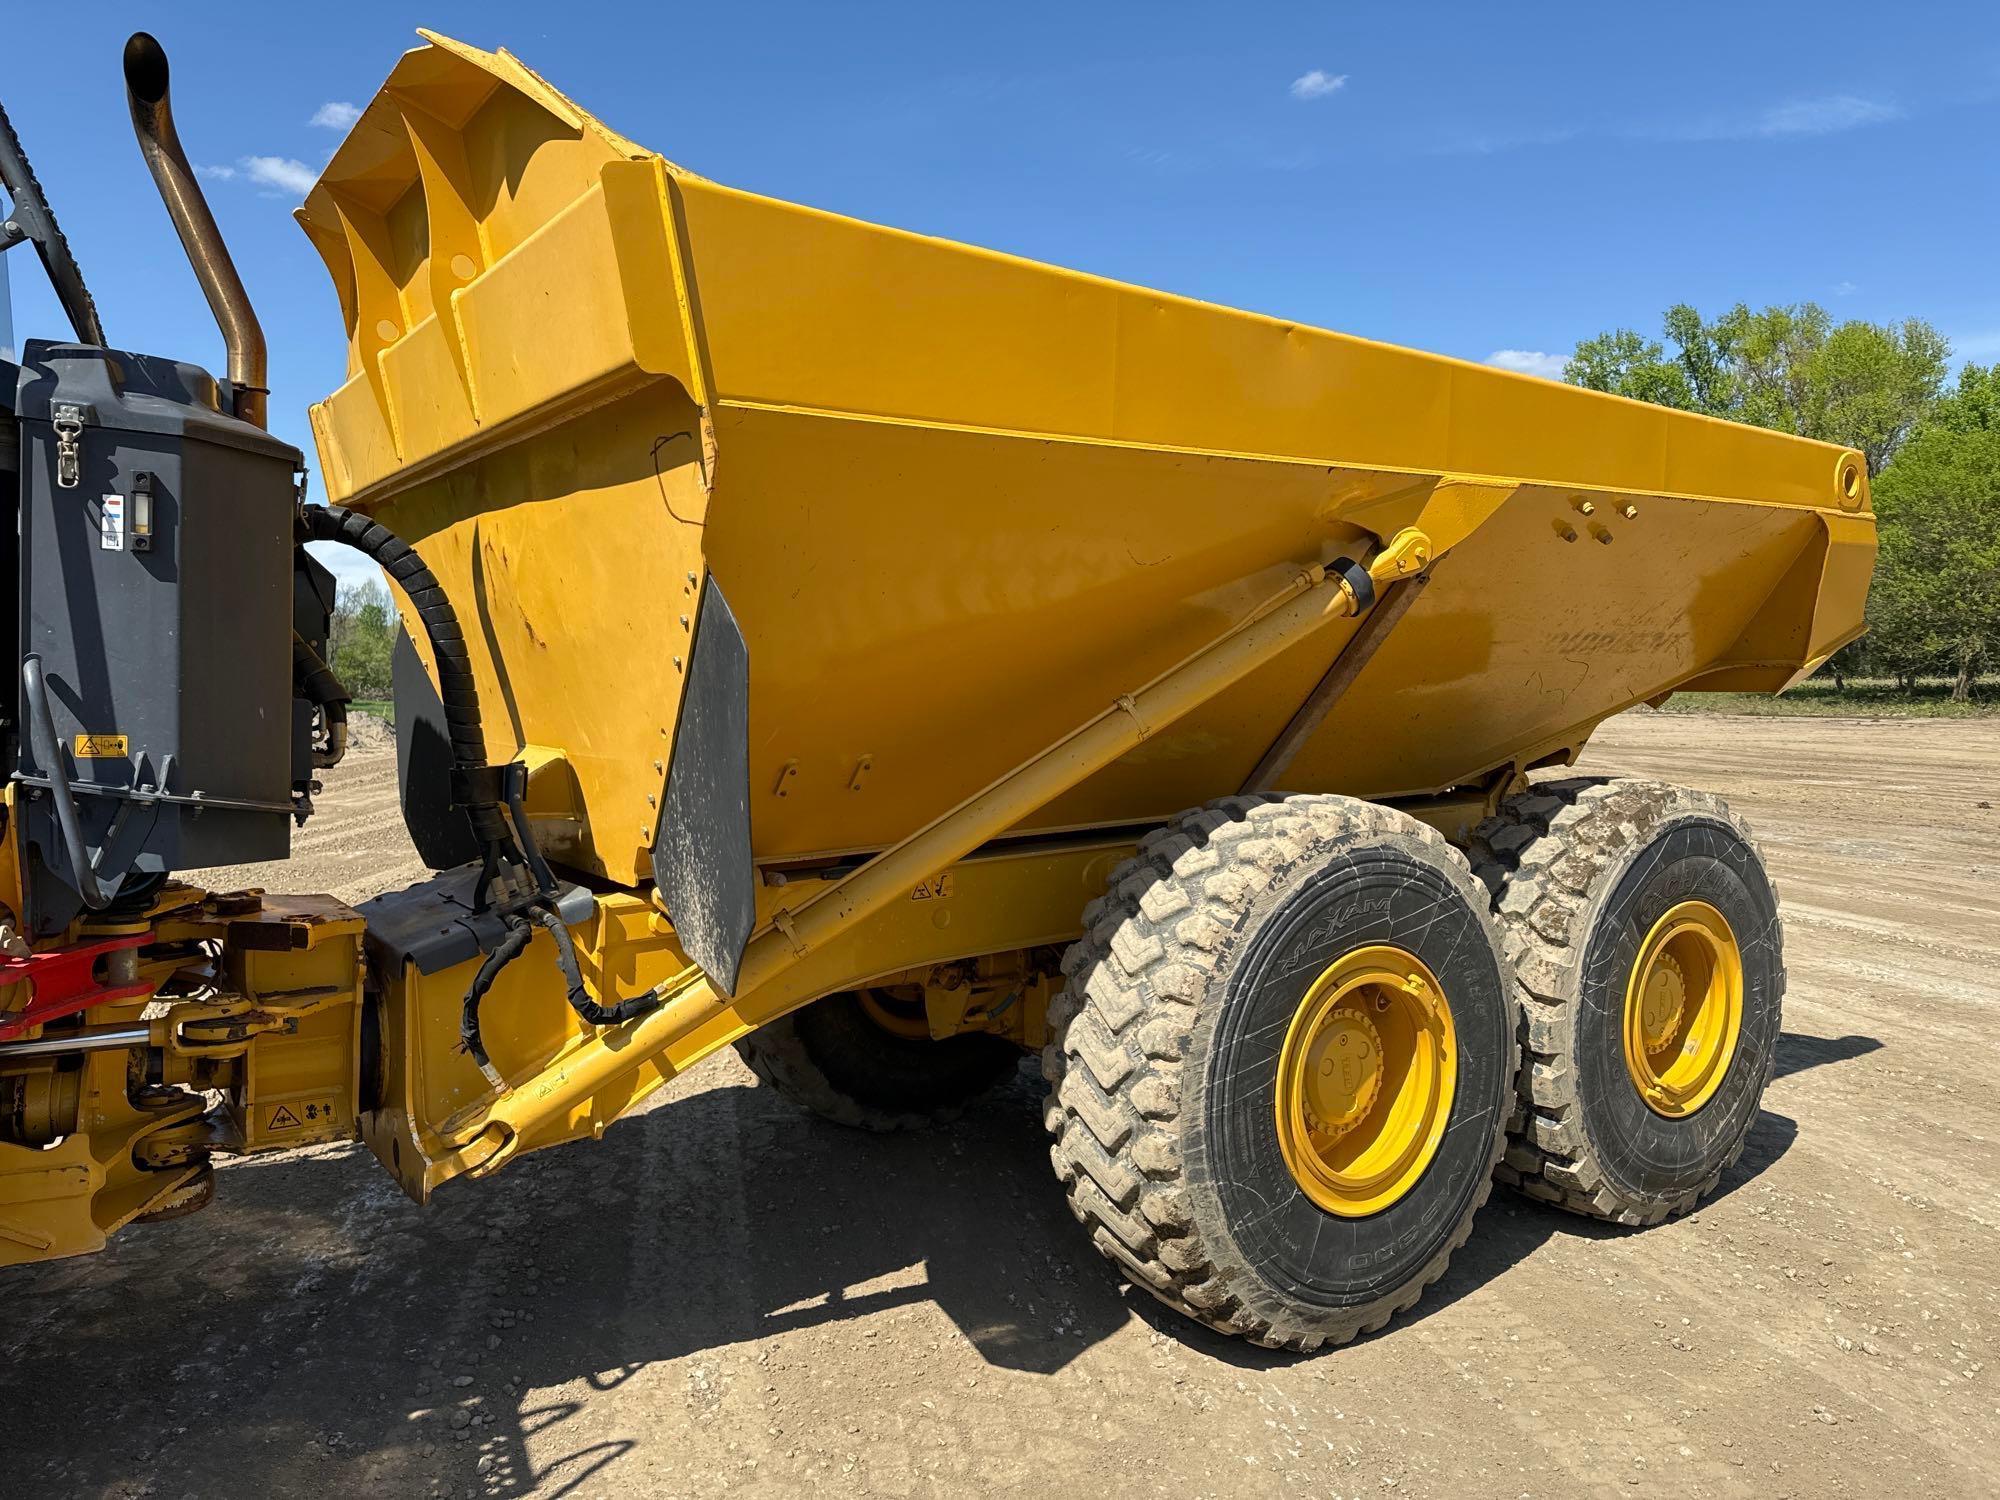 2015 BELL B30E ARTICULATED HAUL TRUCK SN:1206873 6x6, powered by diesel engine, equipped with Cab,